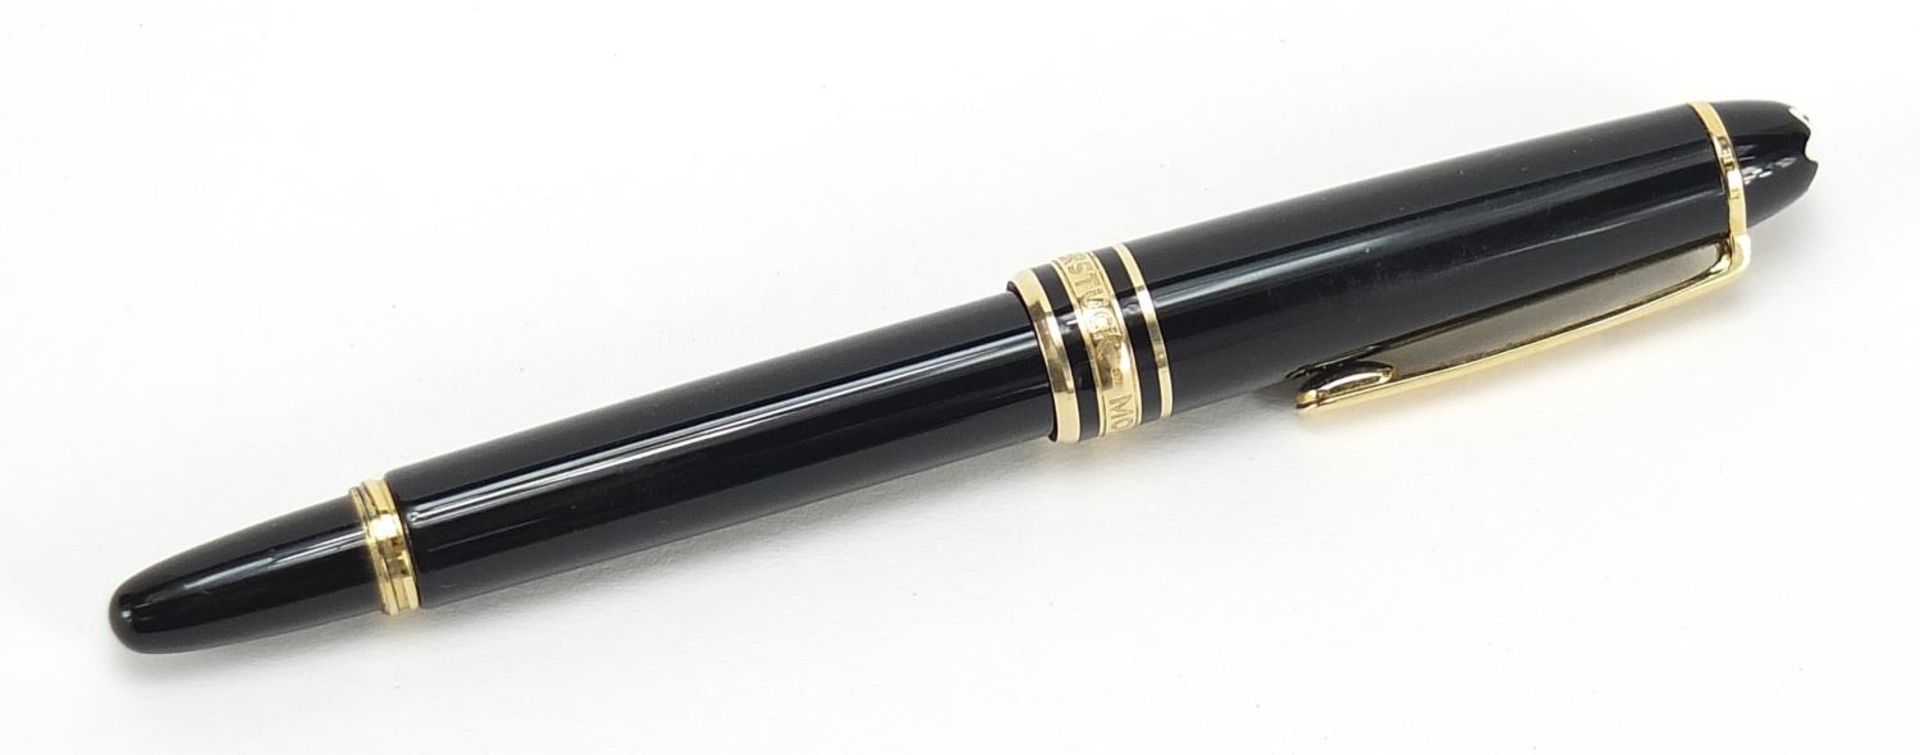 Montblanc Meisterstuck fountain pen with 14k gold nib numbered 4810, serial number PY1046185